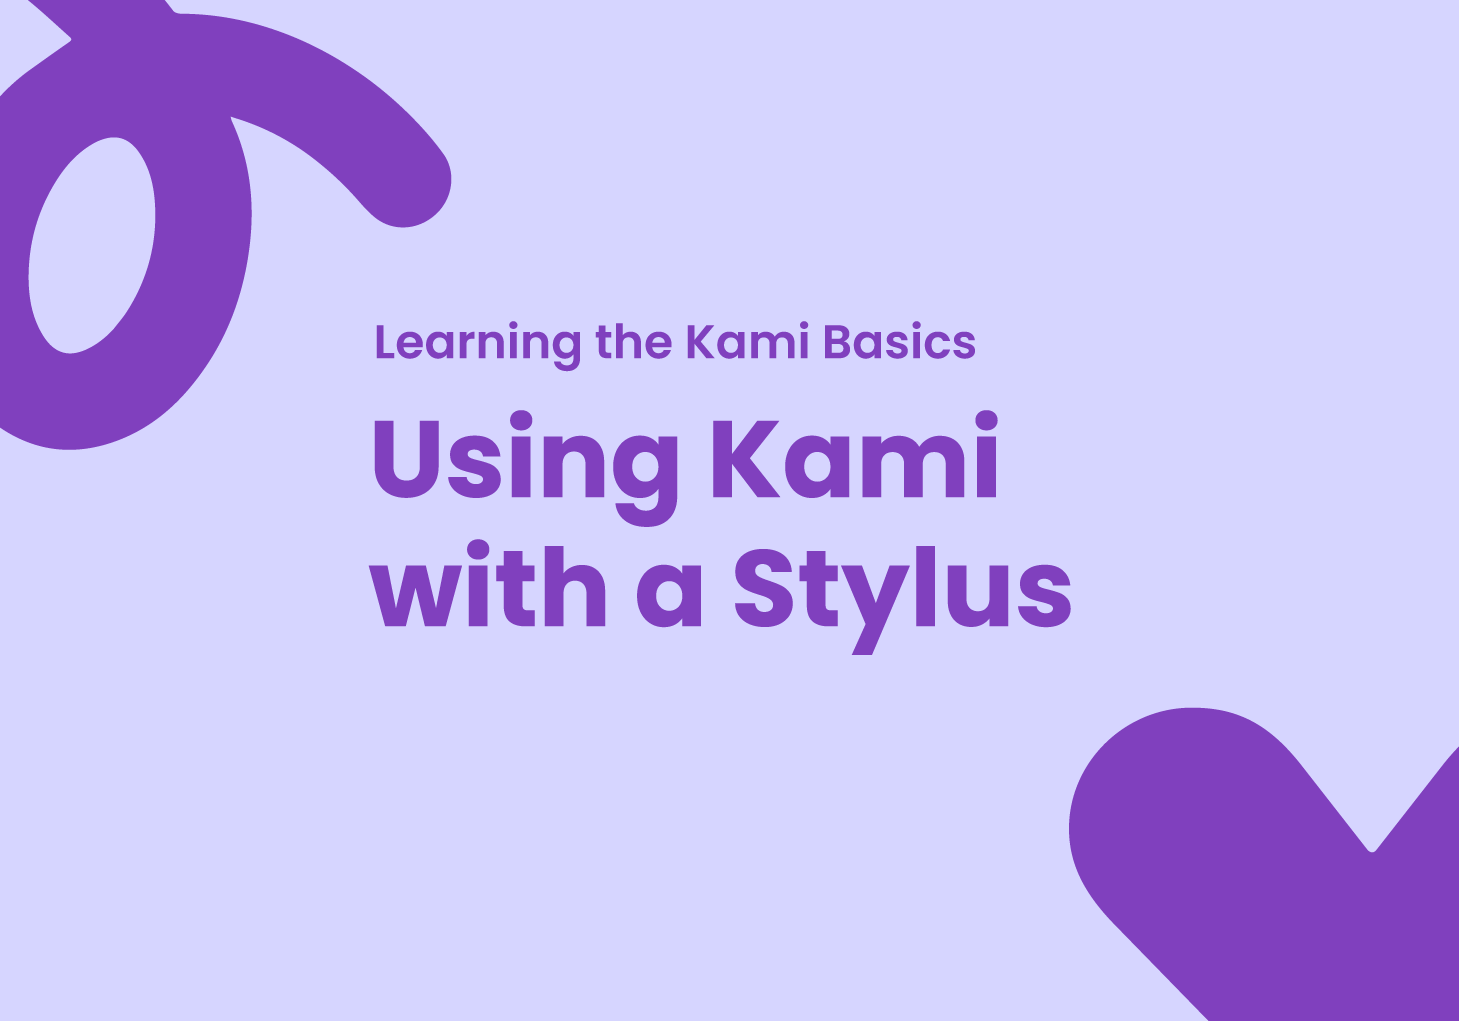 Learning the Kami Basics: Using Kami with a Stylus